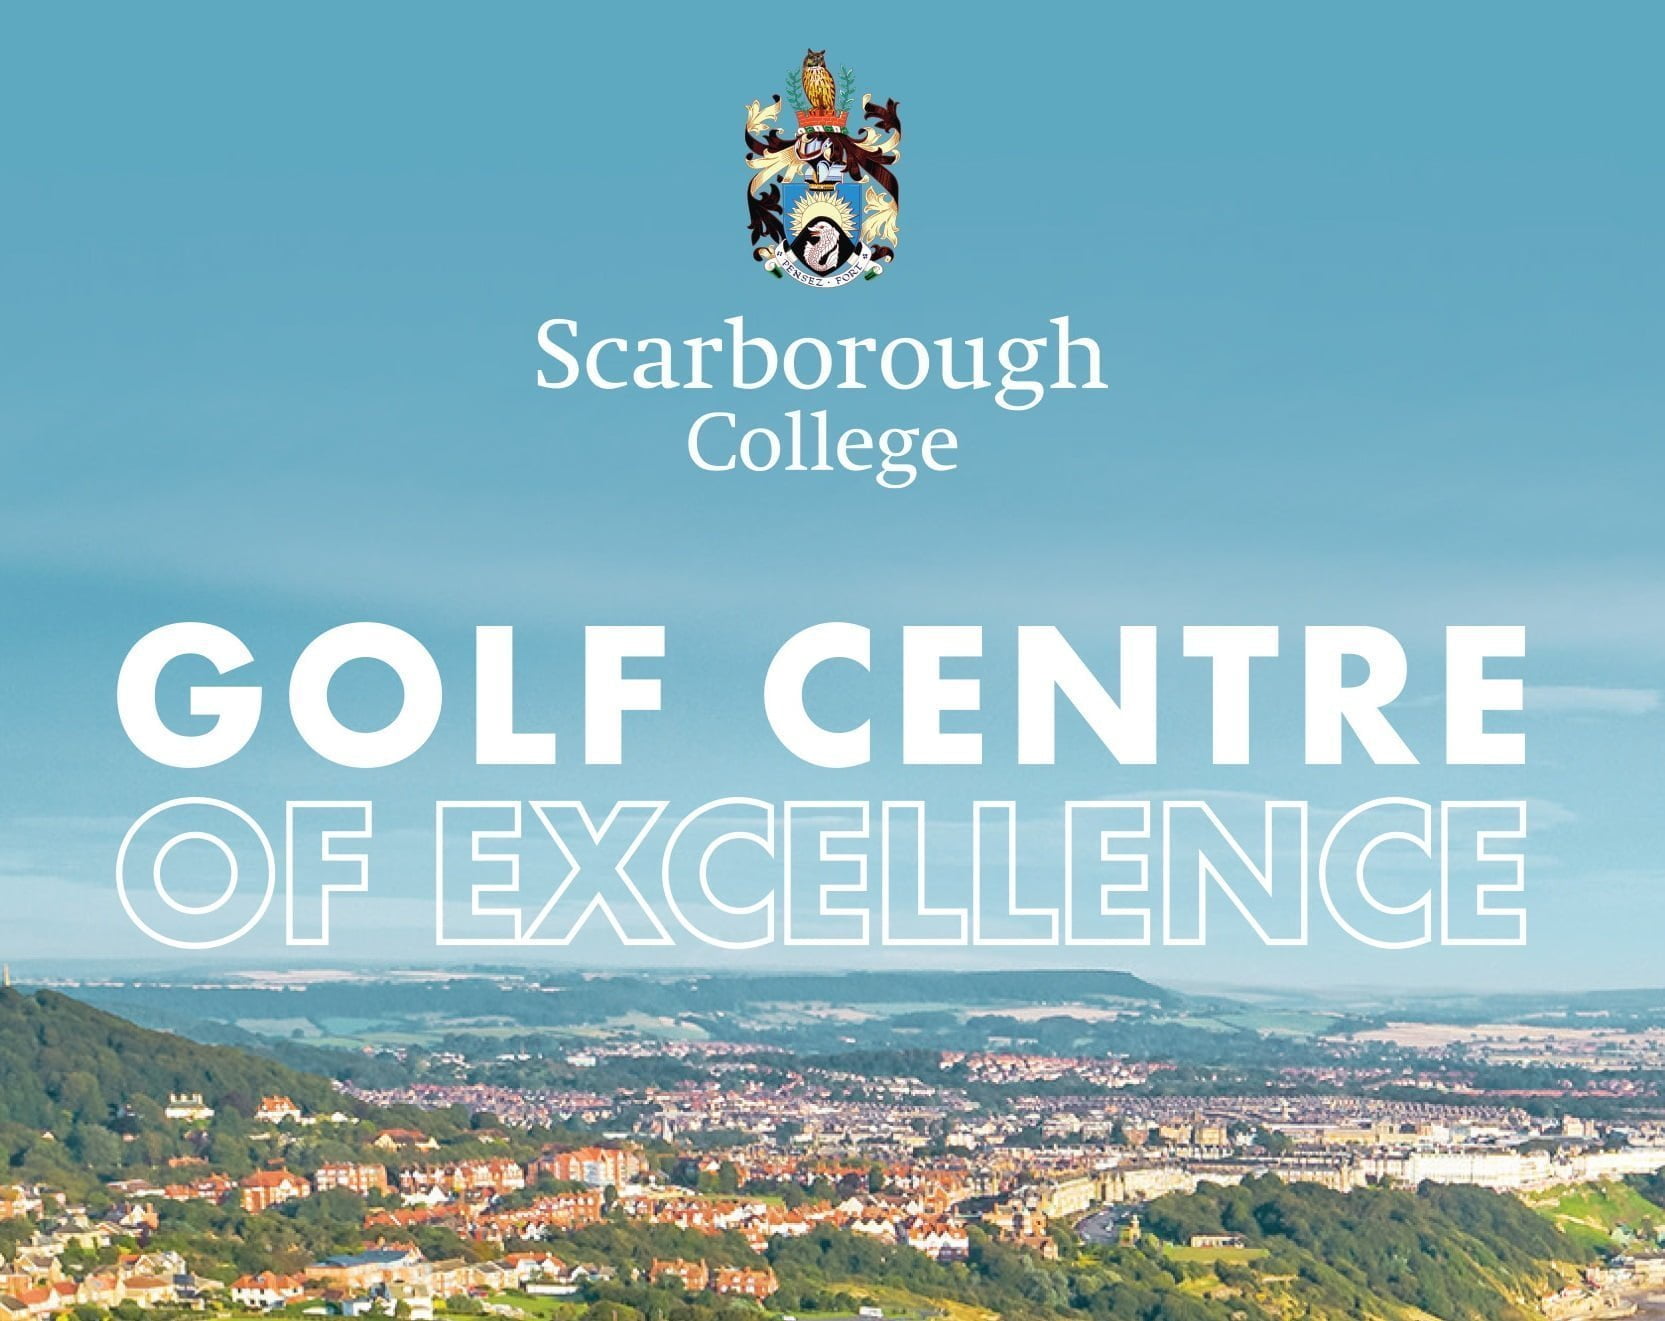 Scarborough College - Golf Centre of Excellence Insert-1